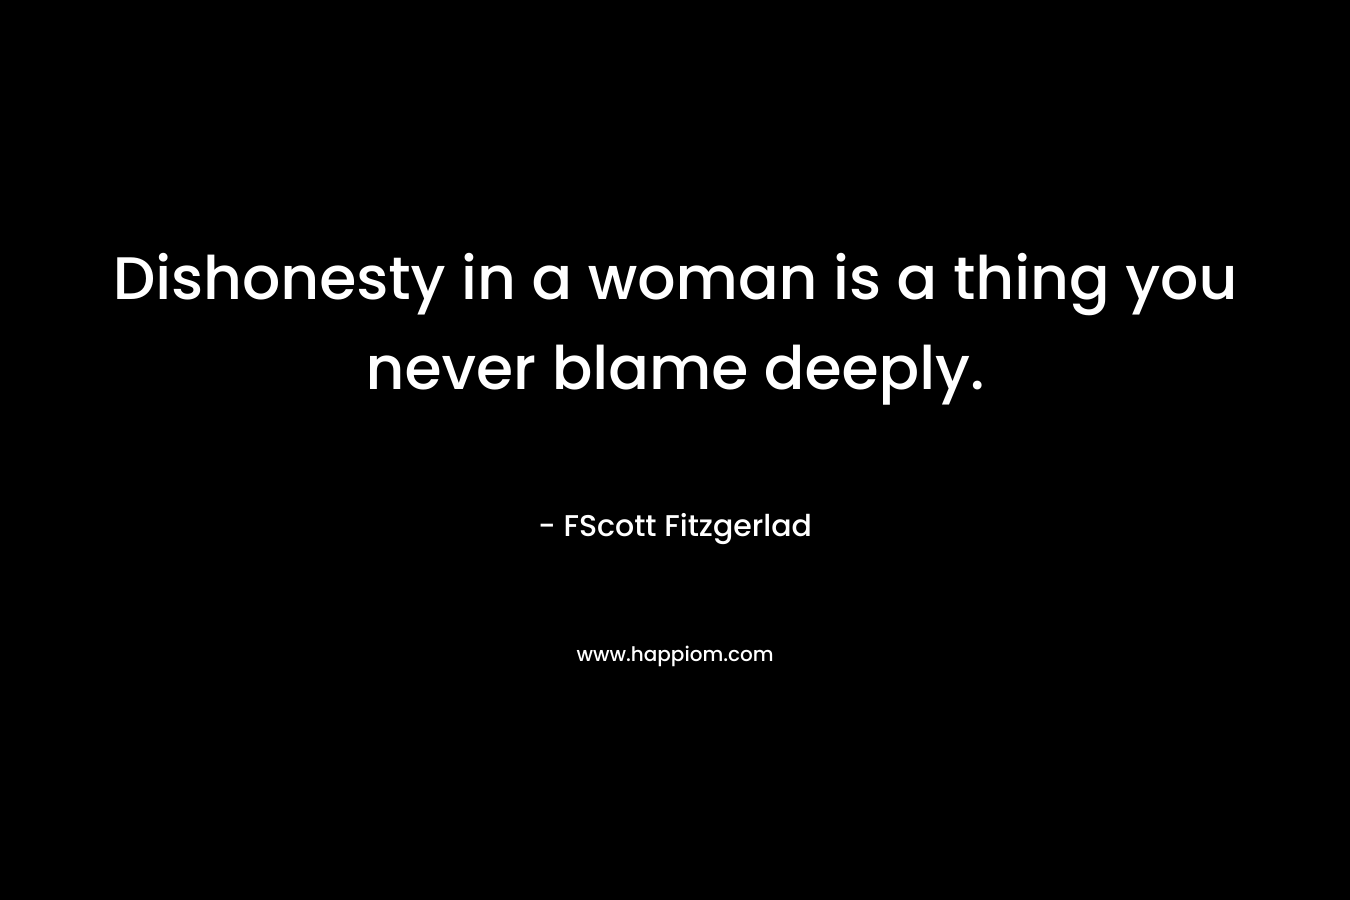 Dishonesty in a woman is a thing you never blame deeply. – FScott Fitzgerlad